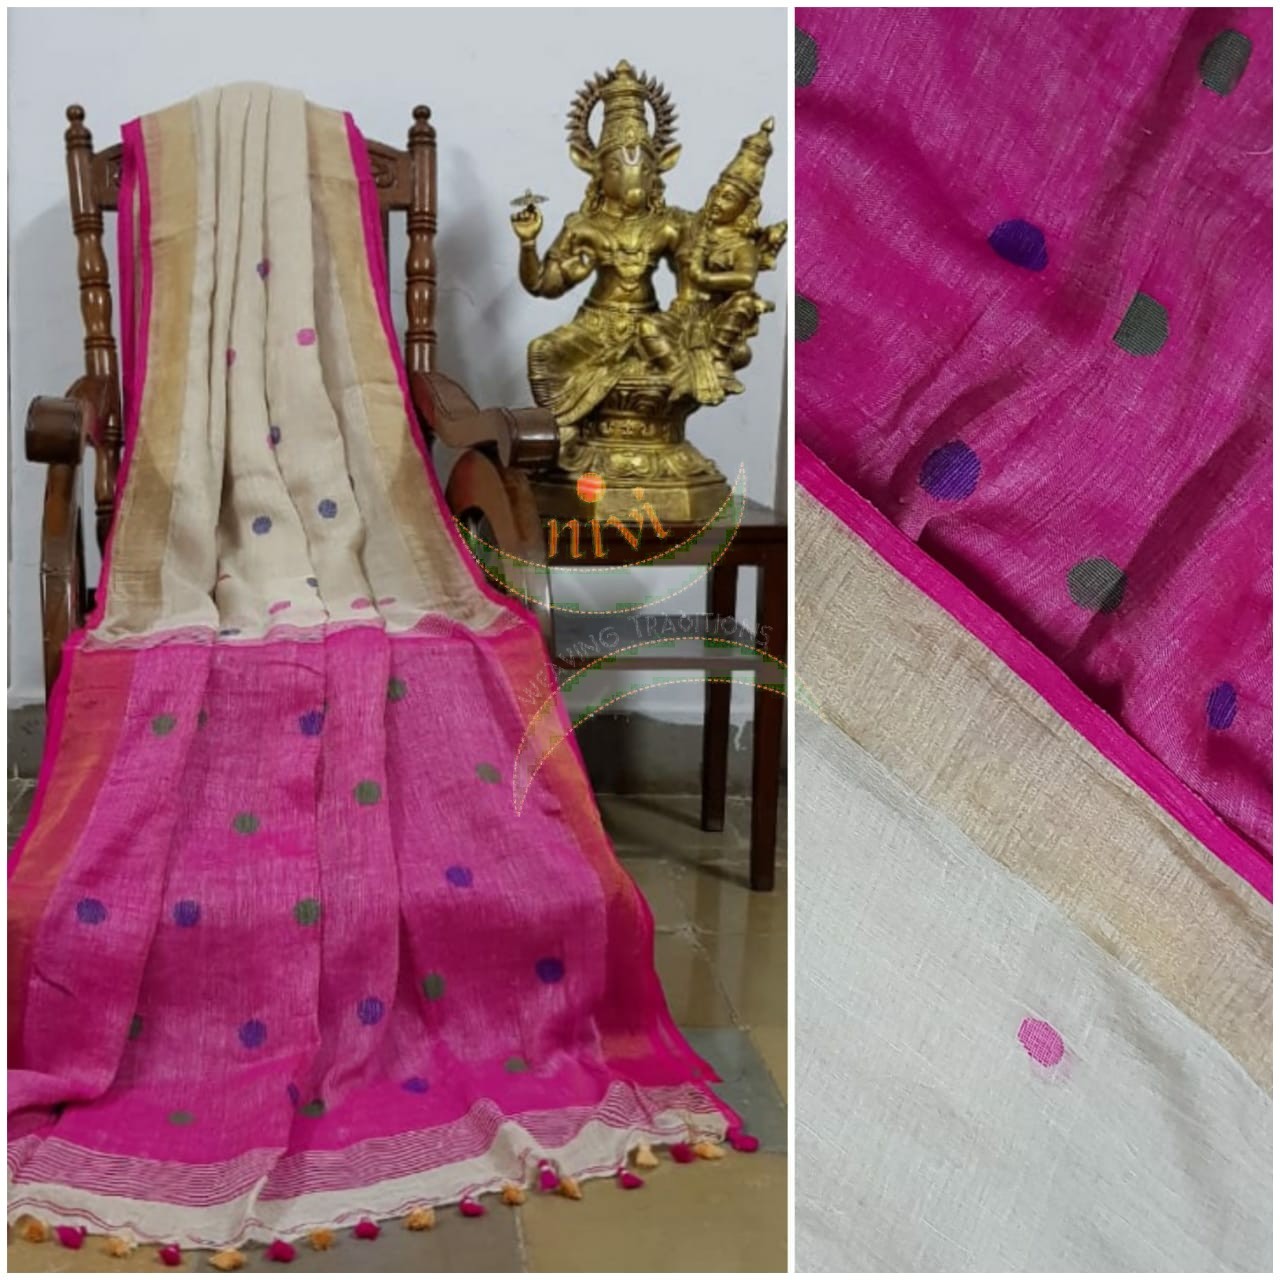 Cream handloom linen with polka dots and contrasting fuschia pink border, pallu and blouse.